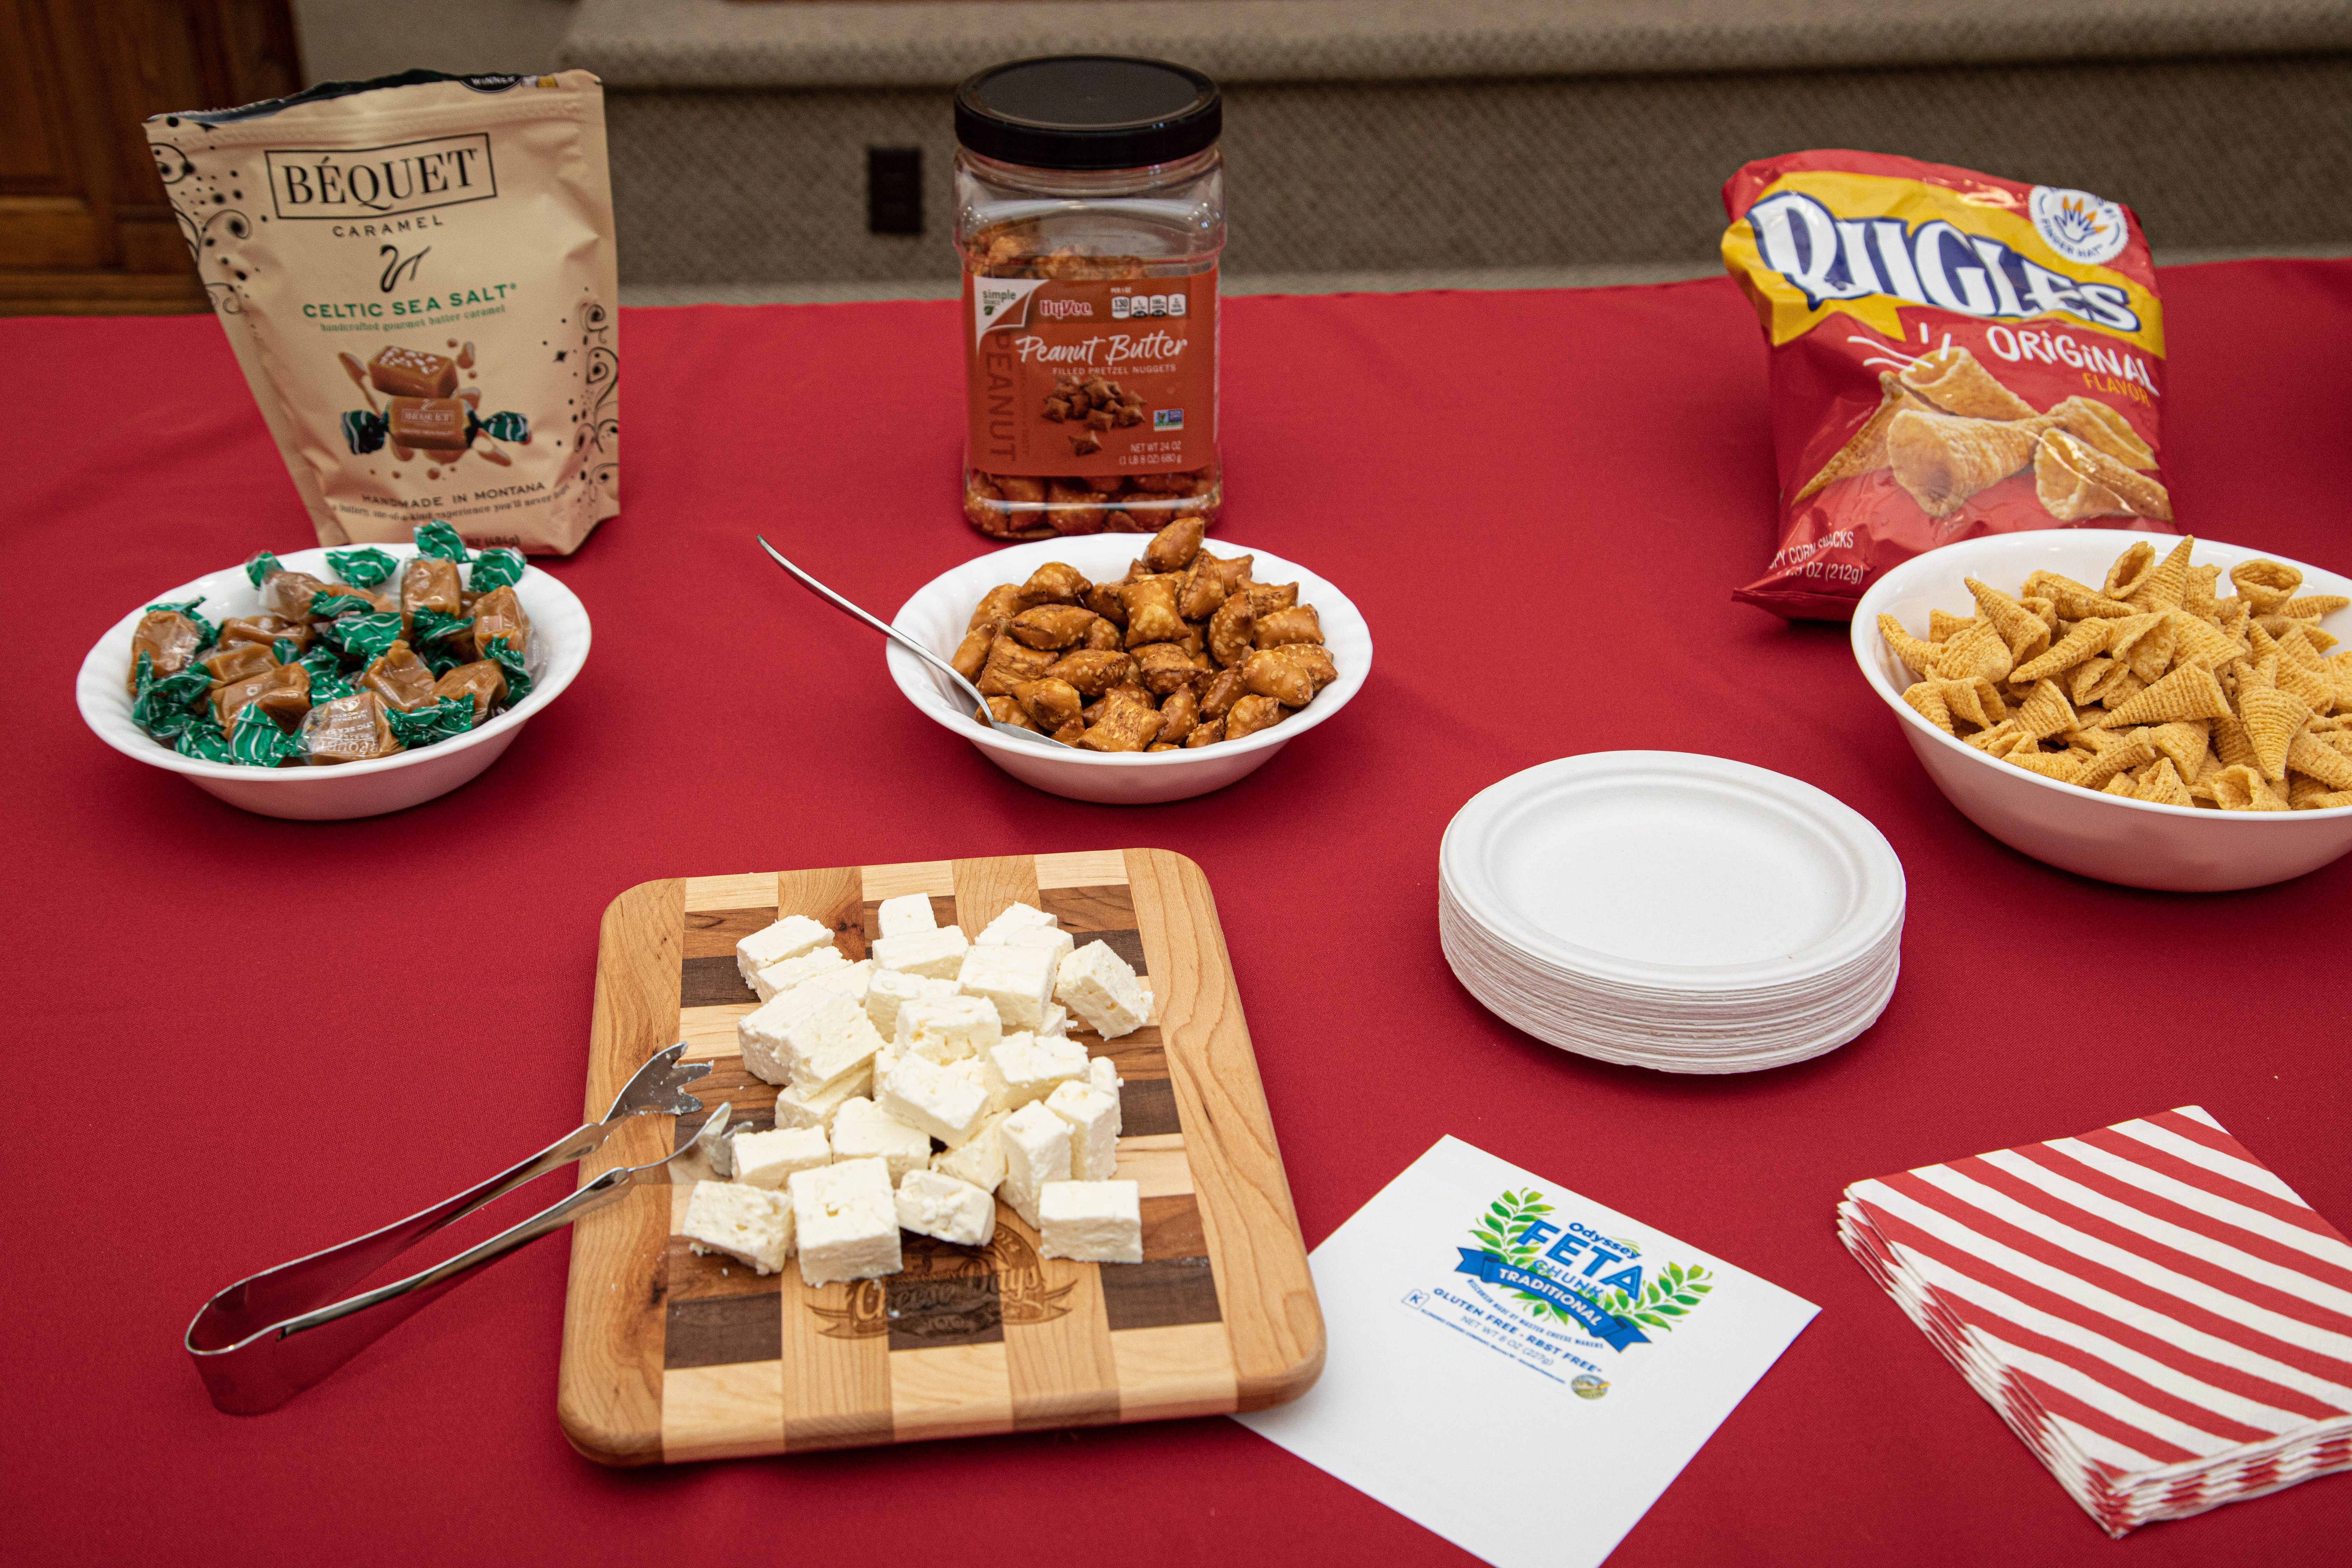 A red table holds a wooden chopping board with feta cheese chunks, a bowl of caramels, a bowl of peanut butter bites, a bowl of bugles snacks, a stack of plates and a stack of red and white striped napkins.